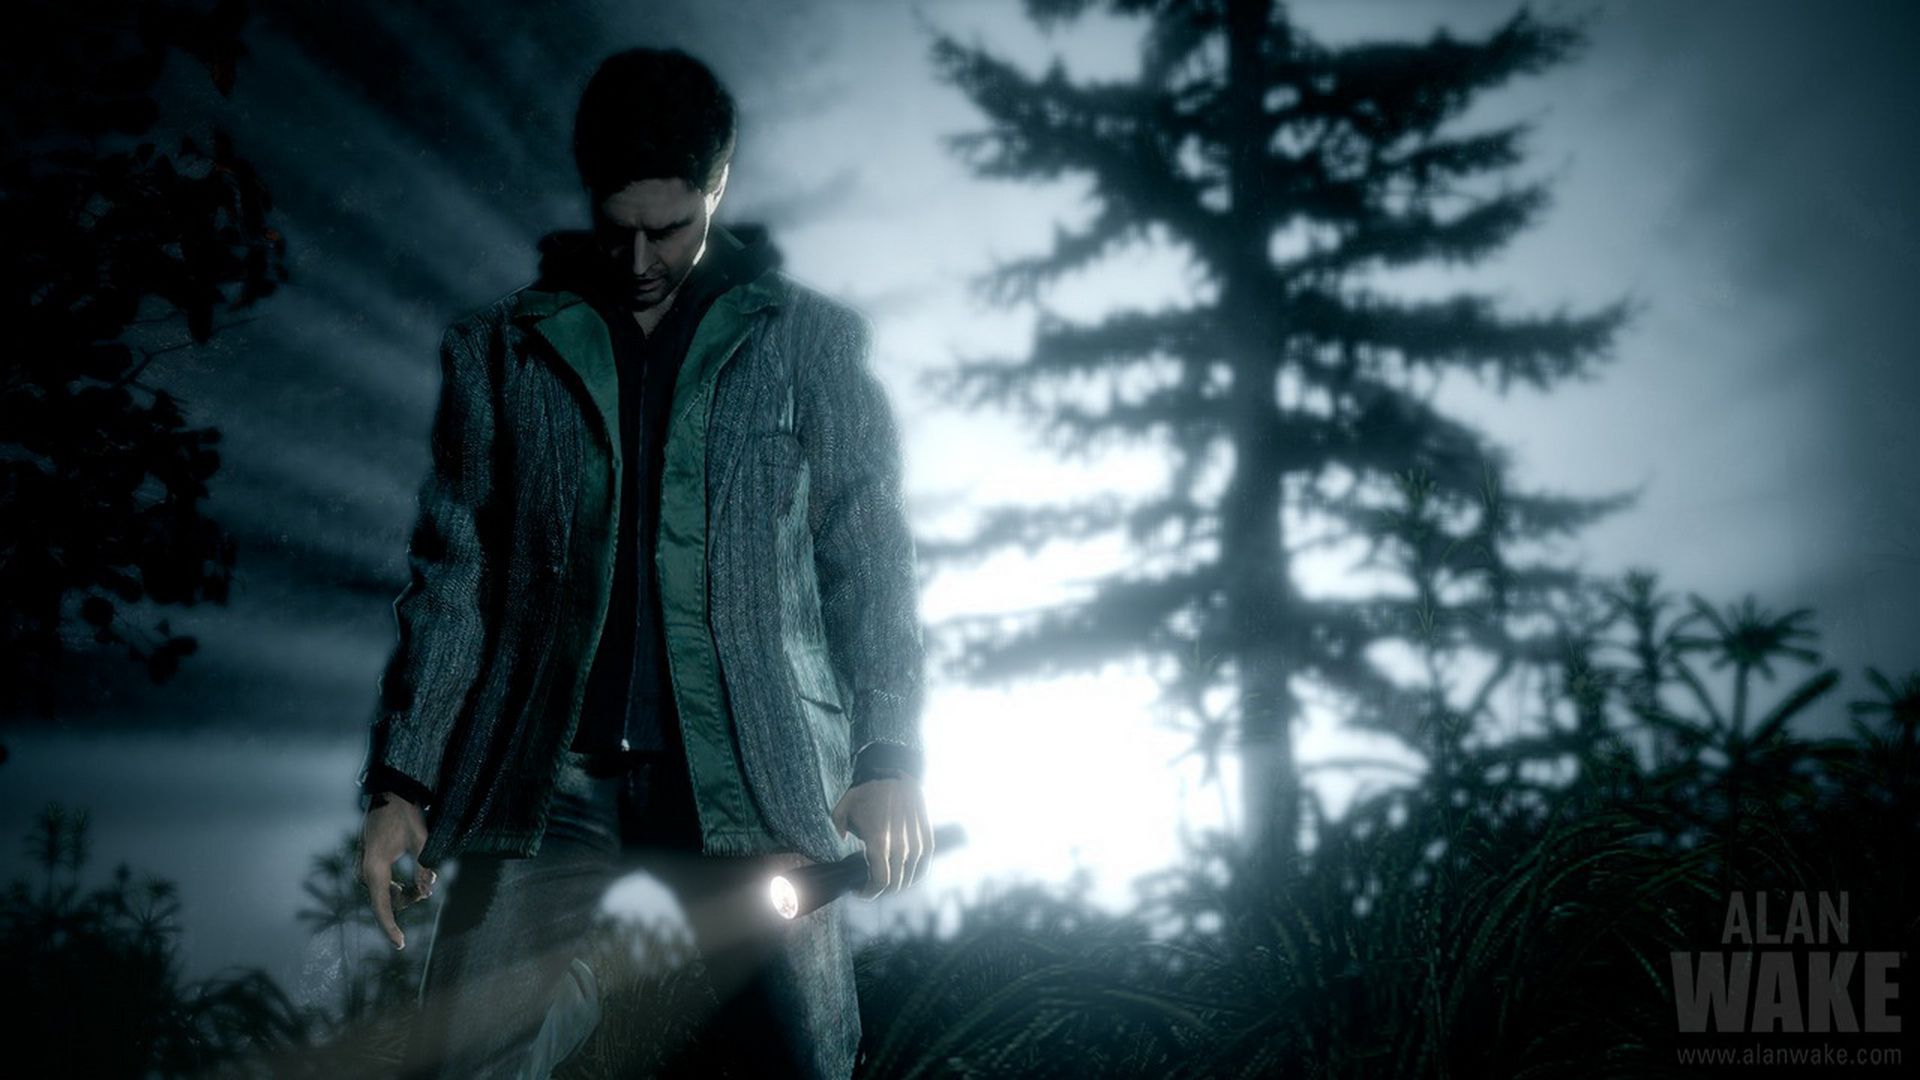 could have made alan wake 2 instead of quantum break